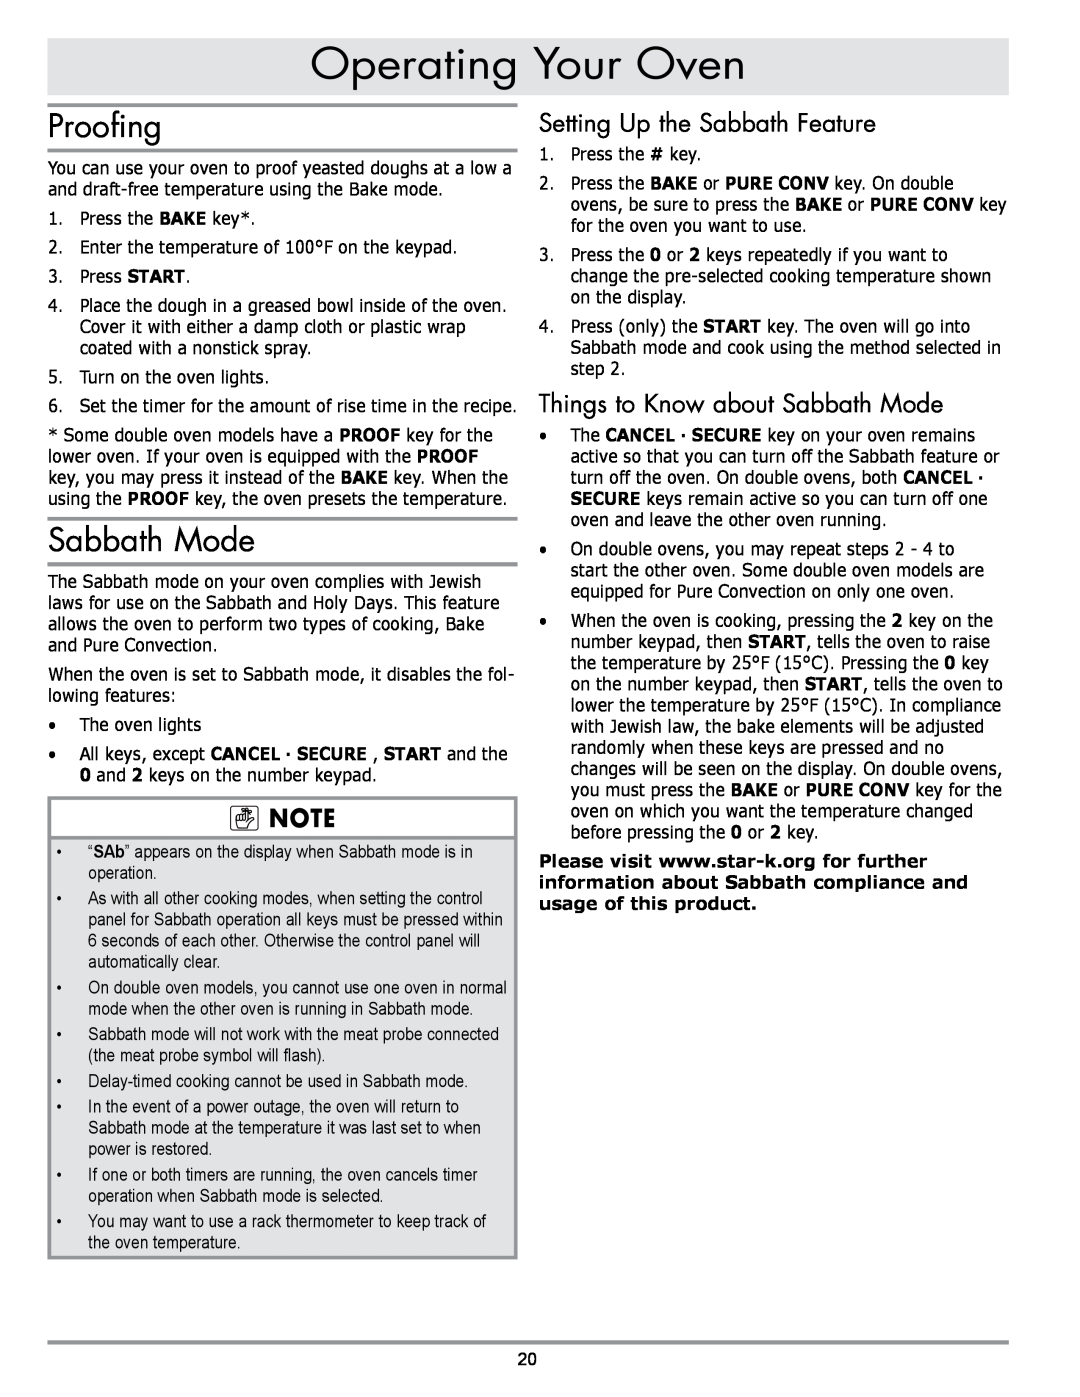 Dacor MORD230 manual Proofing, Setting Up the Sabbath Feature, Things to Know about Sabbath Mode, Operating Your Oven 